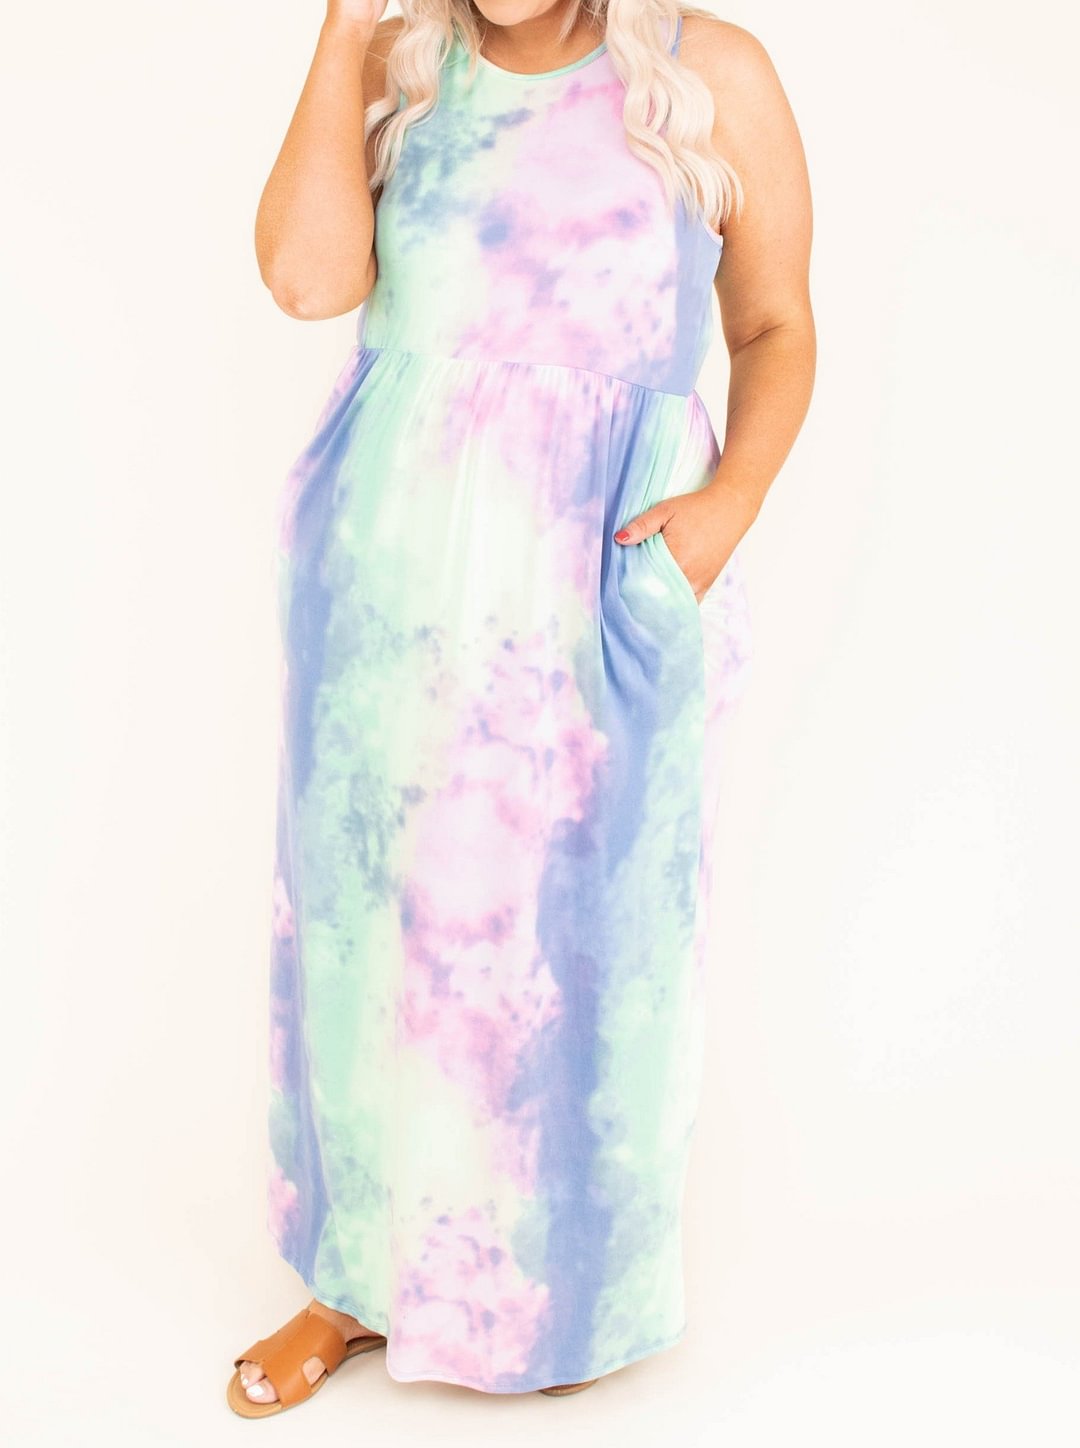 Give Into The Moment Maxi Dress; Mint Pink